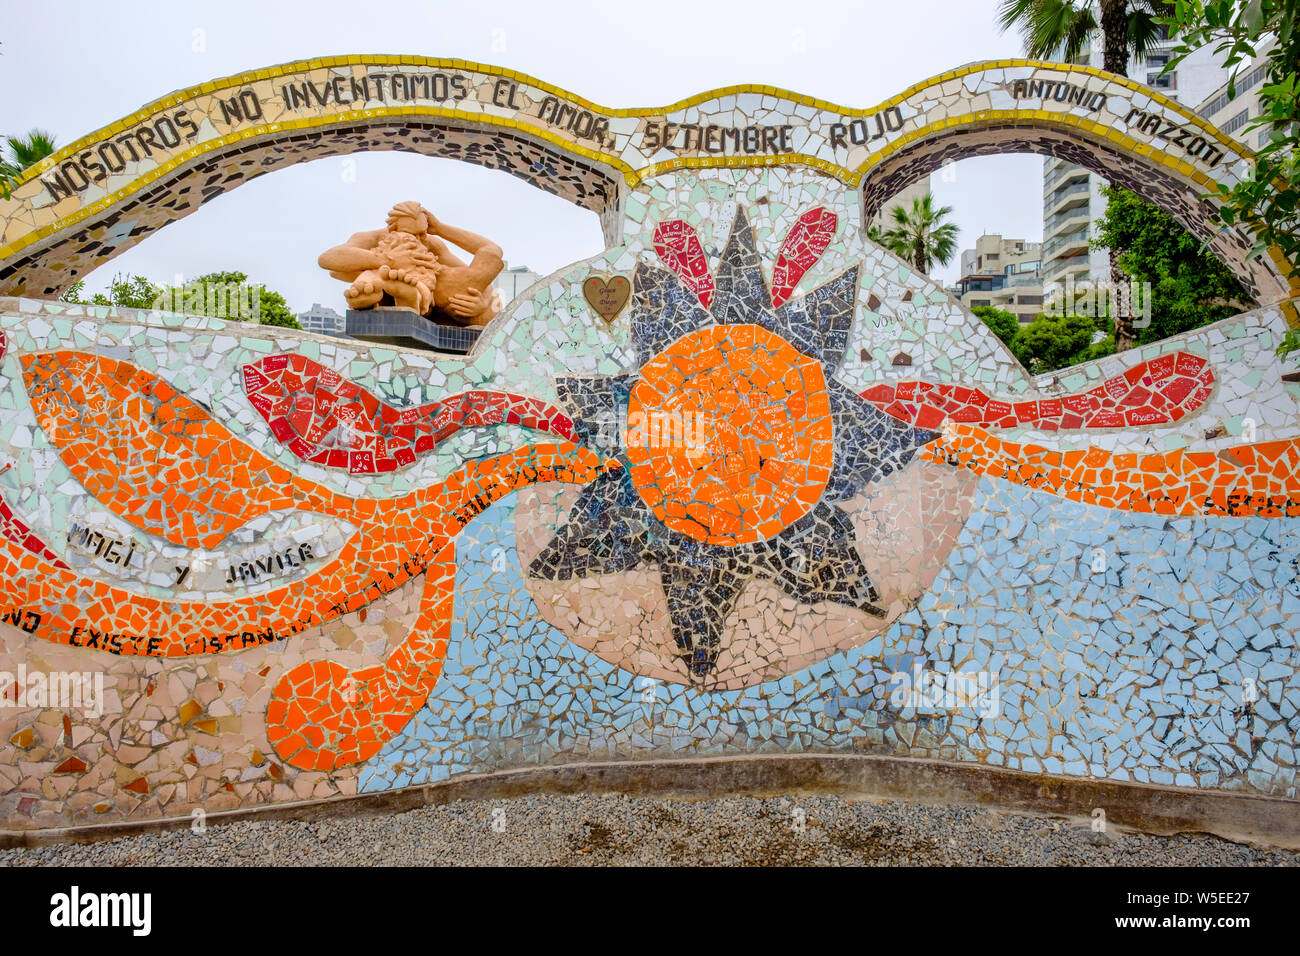 Ceramic mosaic with El Beso (The Kiss), Victor Delfin sculpture on background at Parque del Amor (Love Park) in the District of Miraflores, Lima, Peru Stock Photo